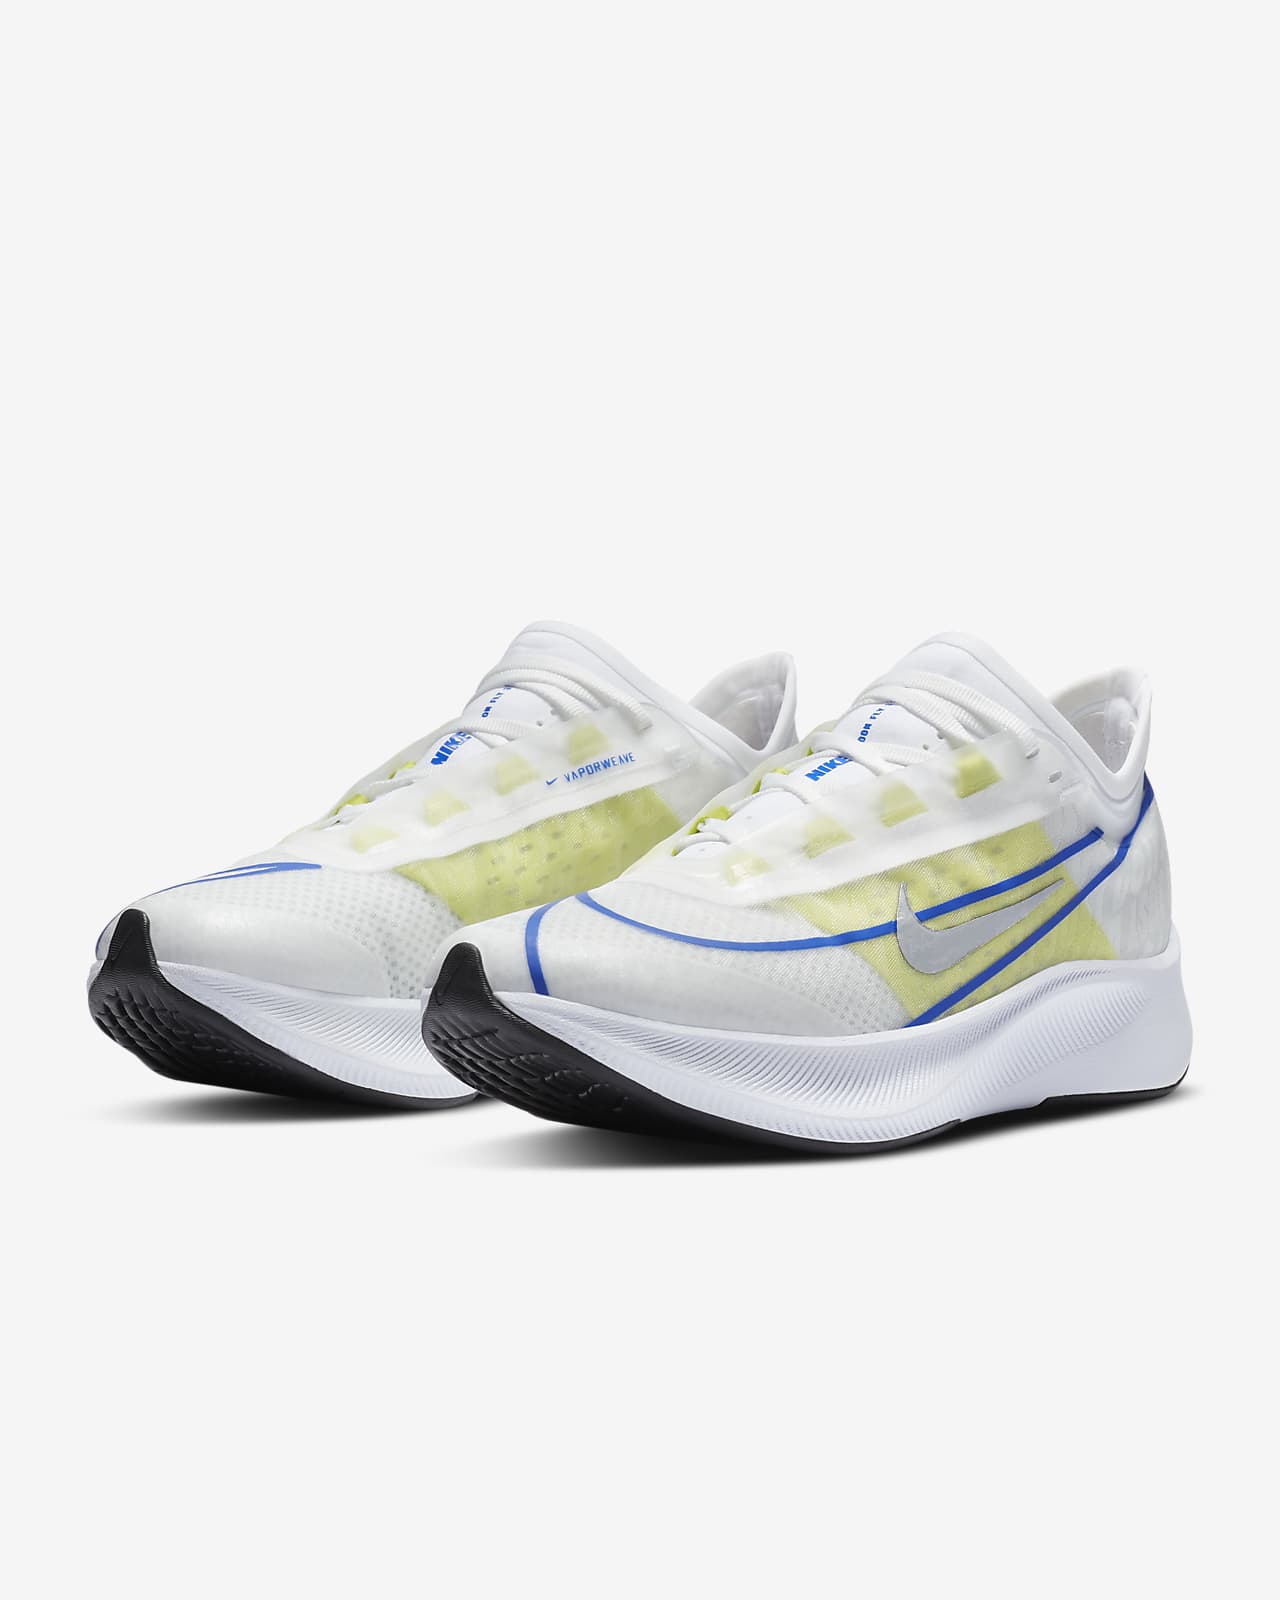 nike zoom fly 3 womens review